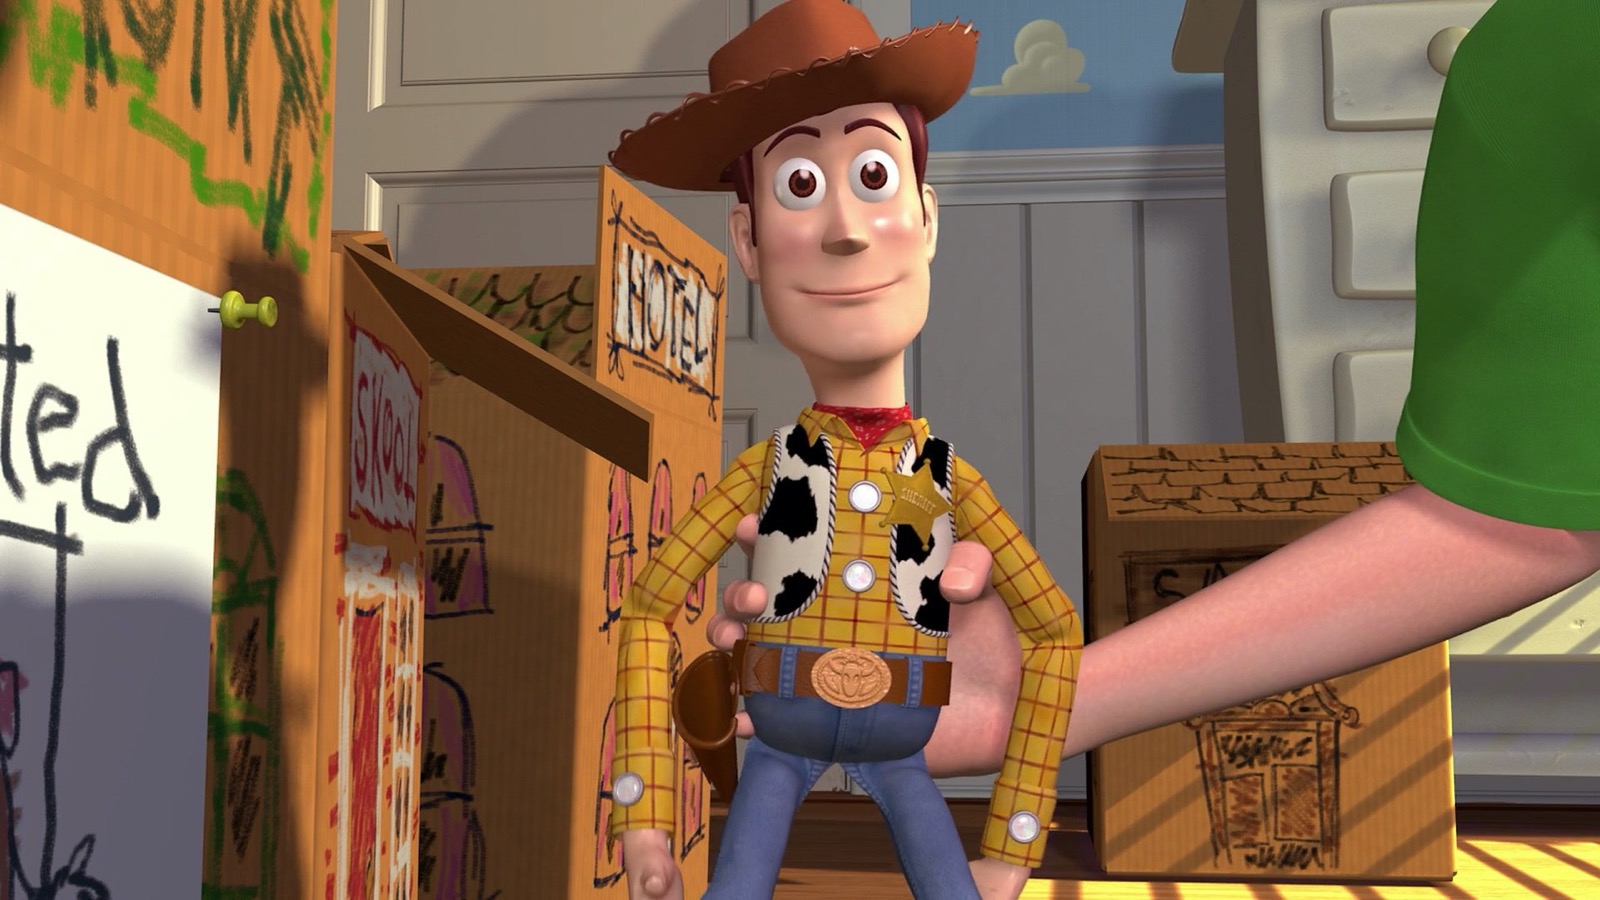 Only a True Pixar Fan Has Watched 18/21 of These Movies Toy Story (1995)